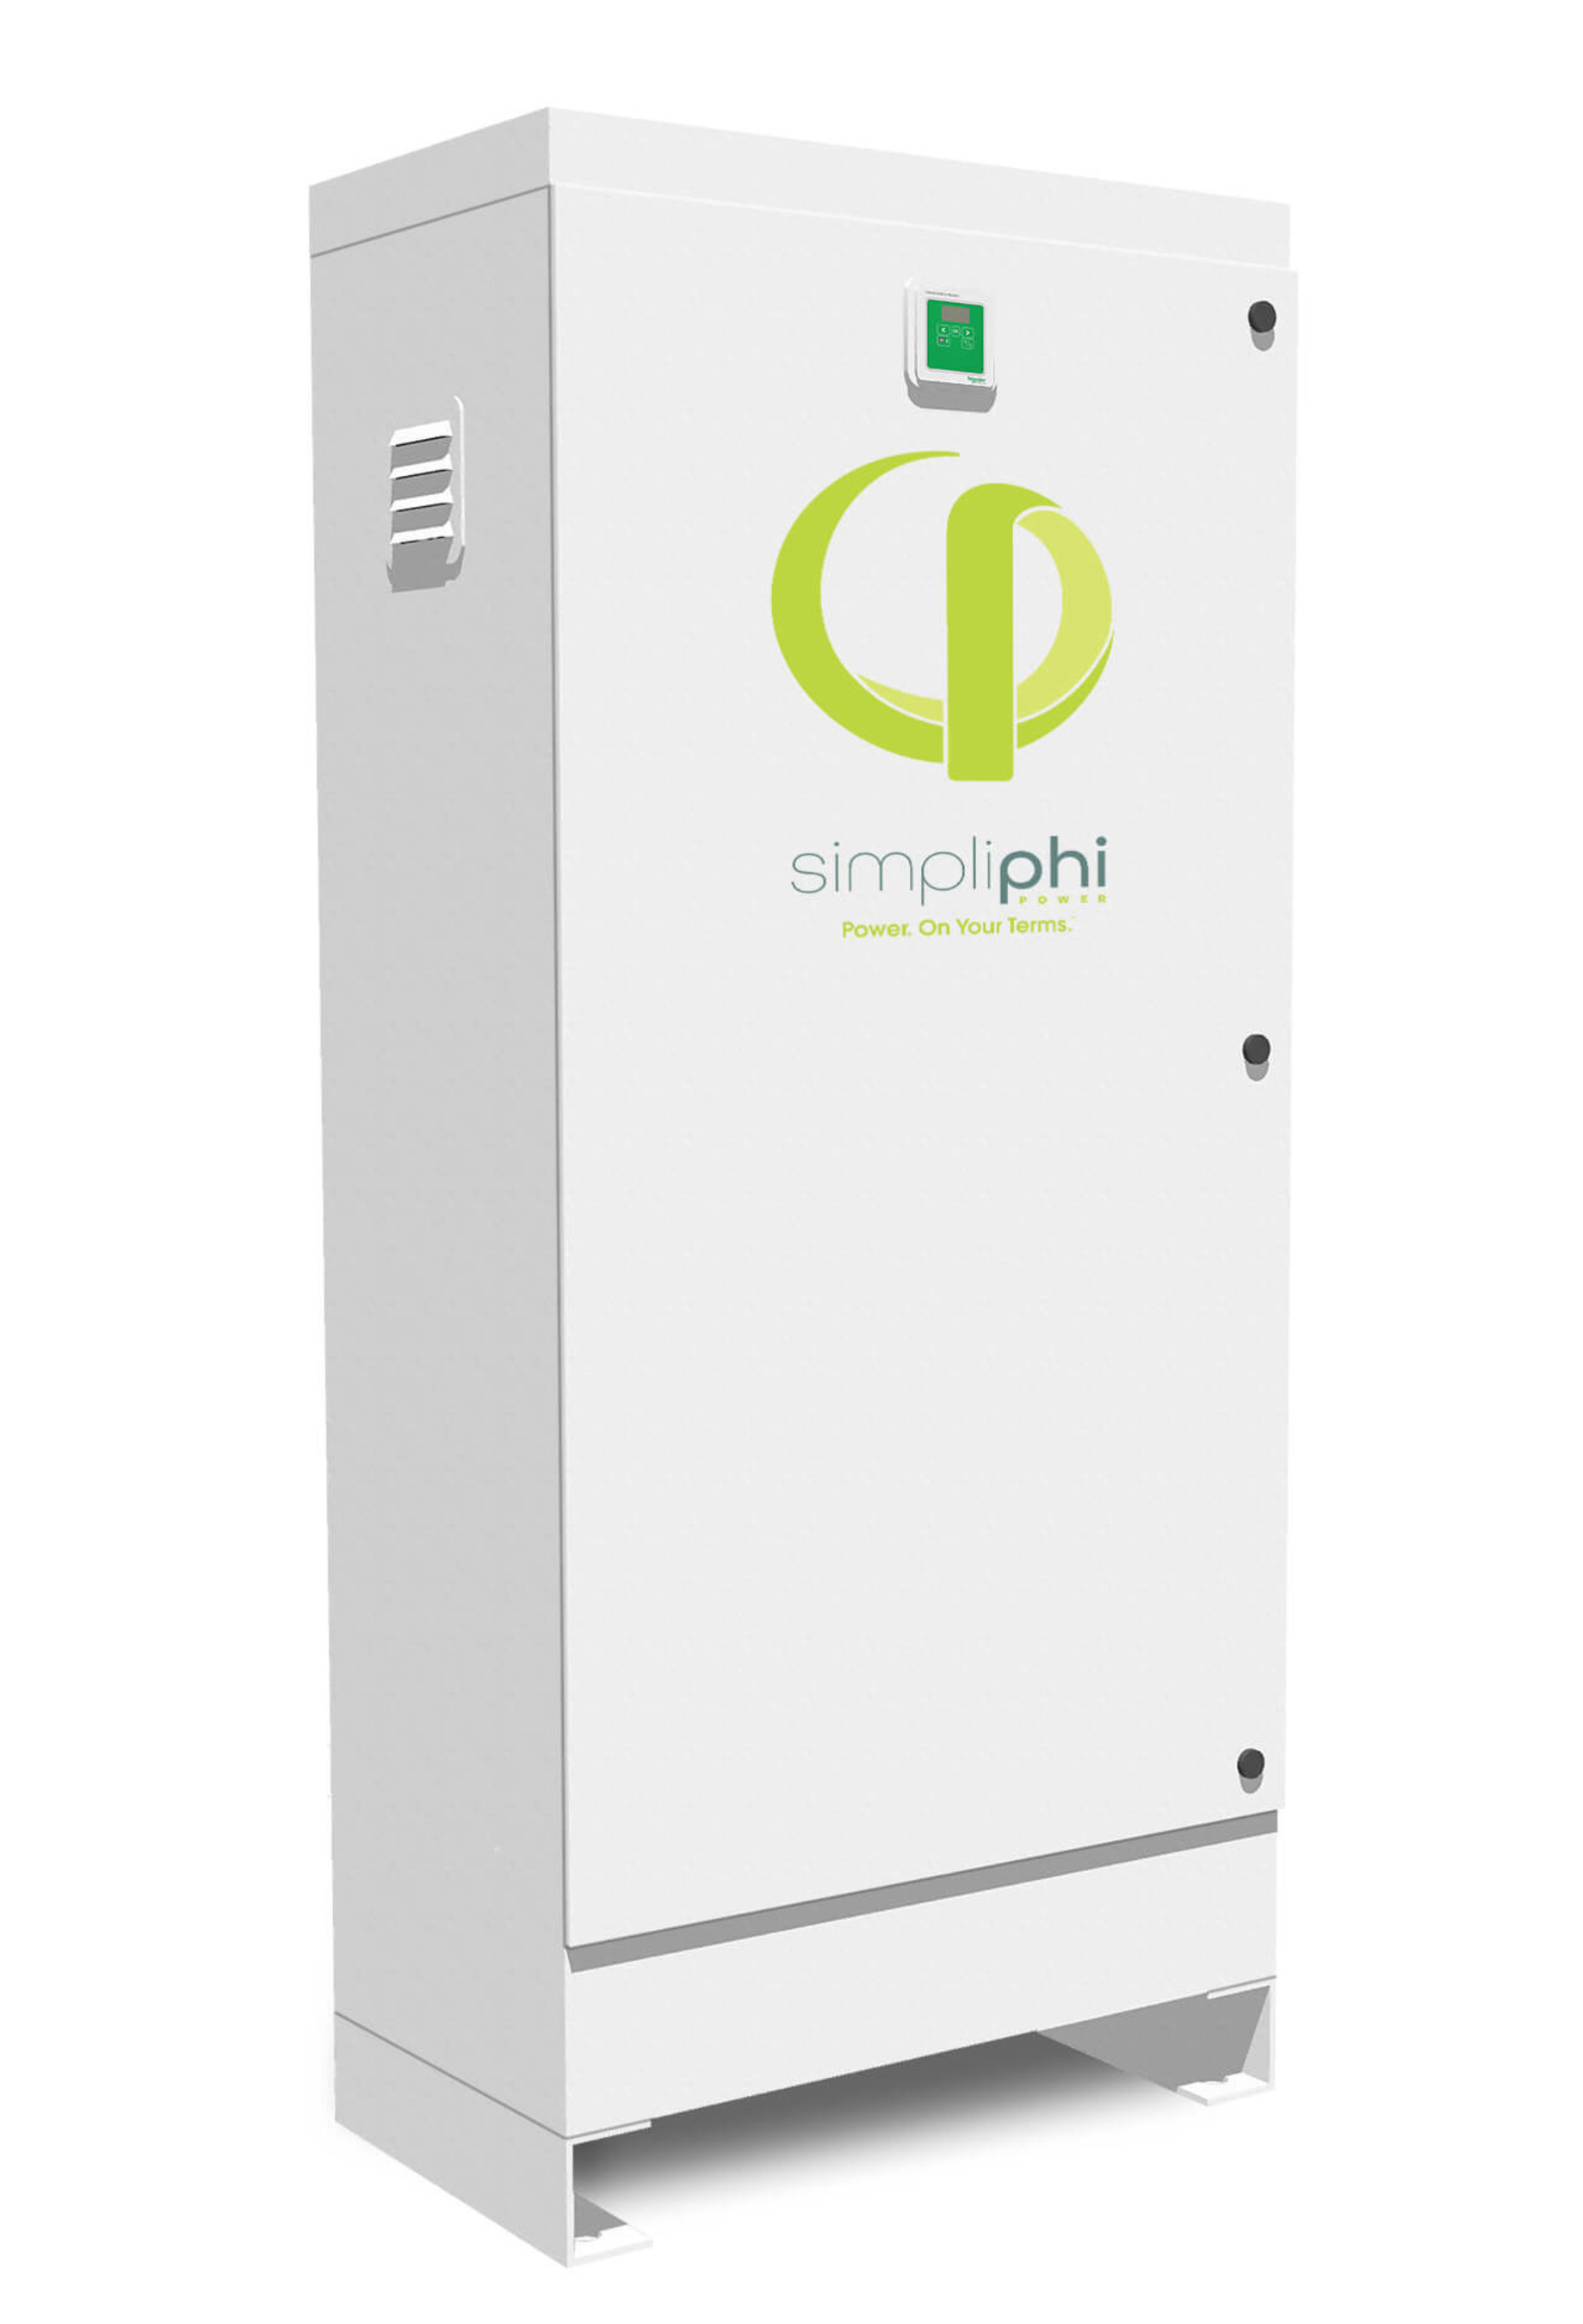 Developed by solar installers for solar installers, SimpliPhi Power has released a fully integrated plug-and-play Energy Storage System (ESS) that combines inverters, wiring and software. The new ESS works with new and existing solar installations (on and off grid), to make design, cost calculations and installation simple.